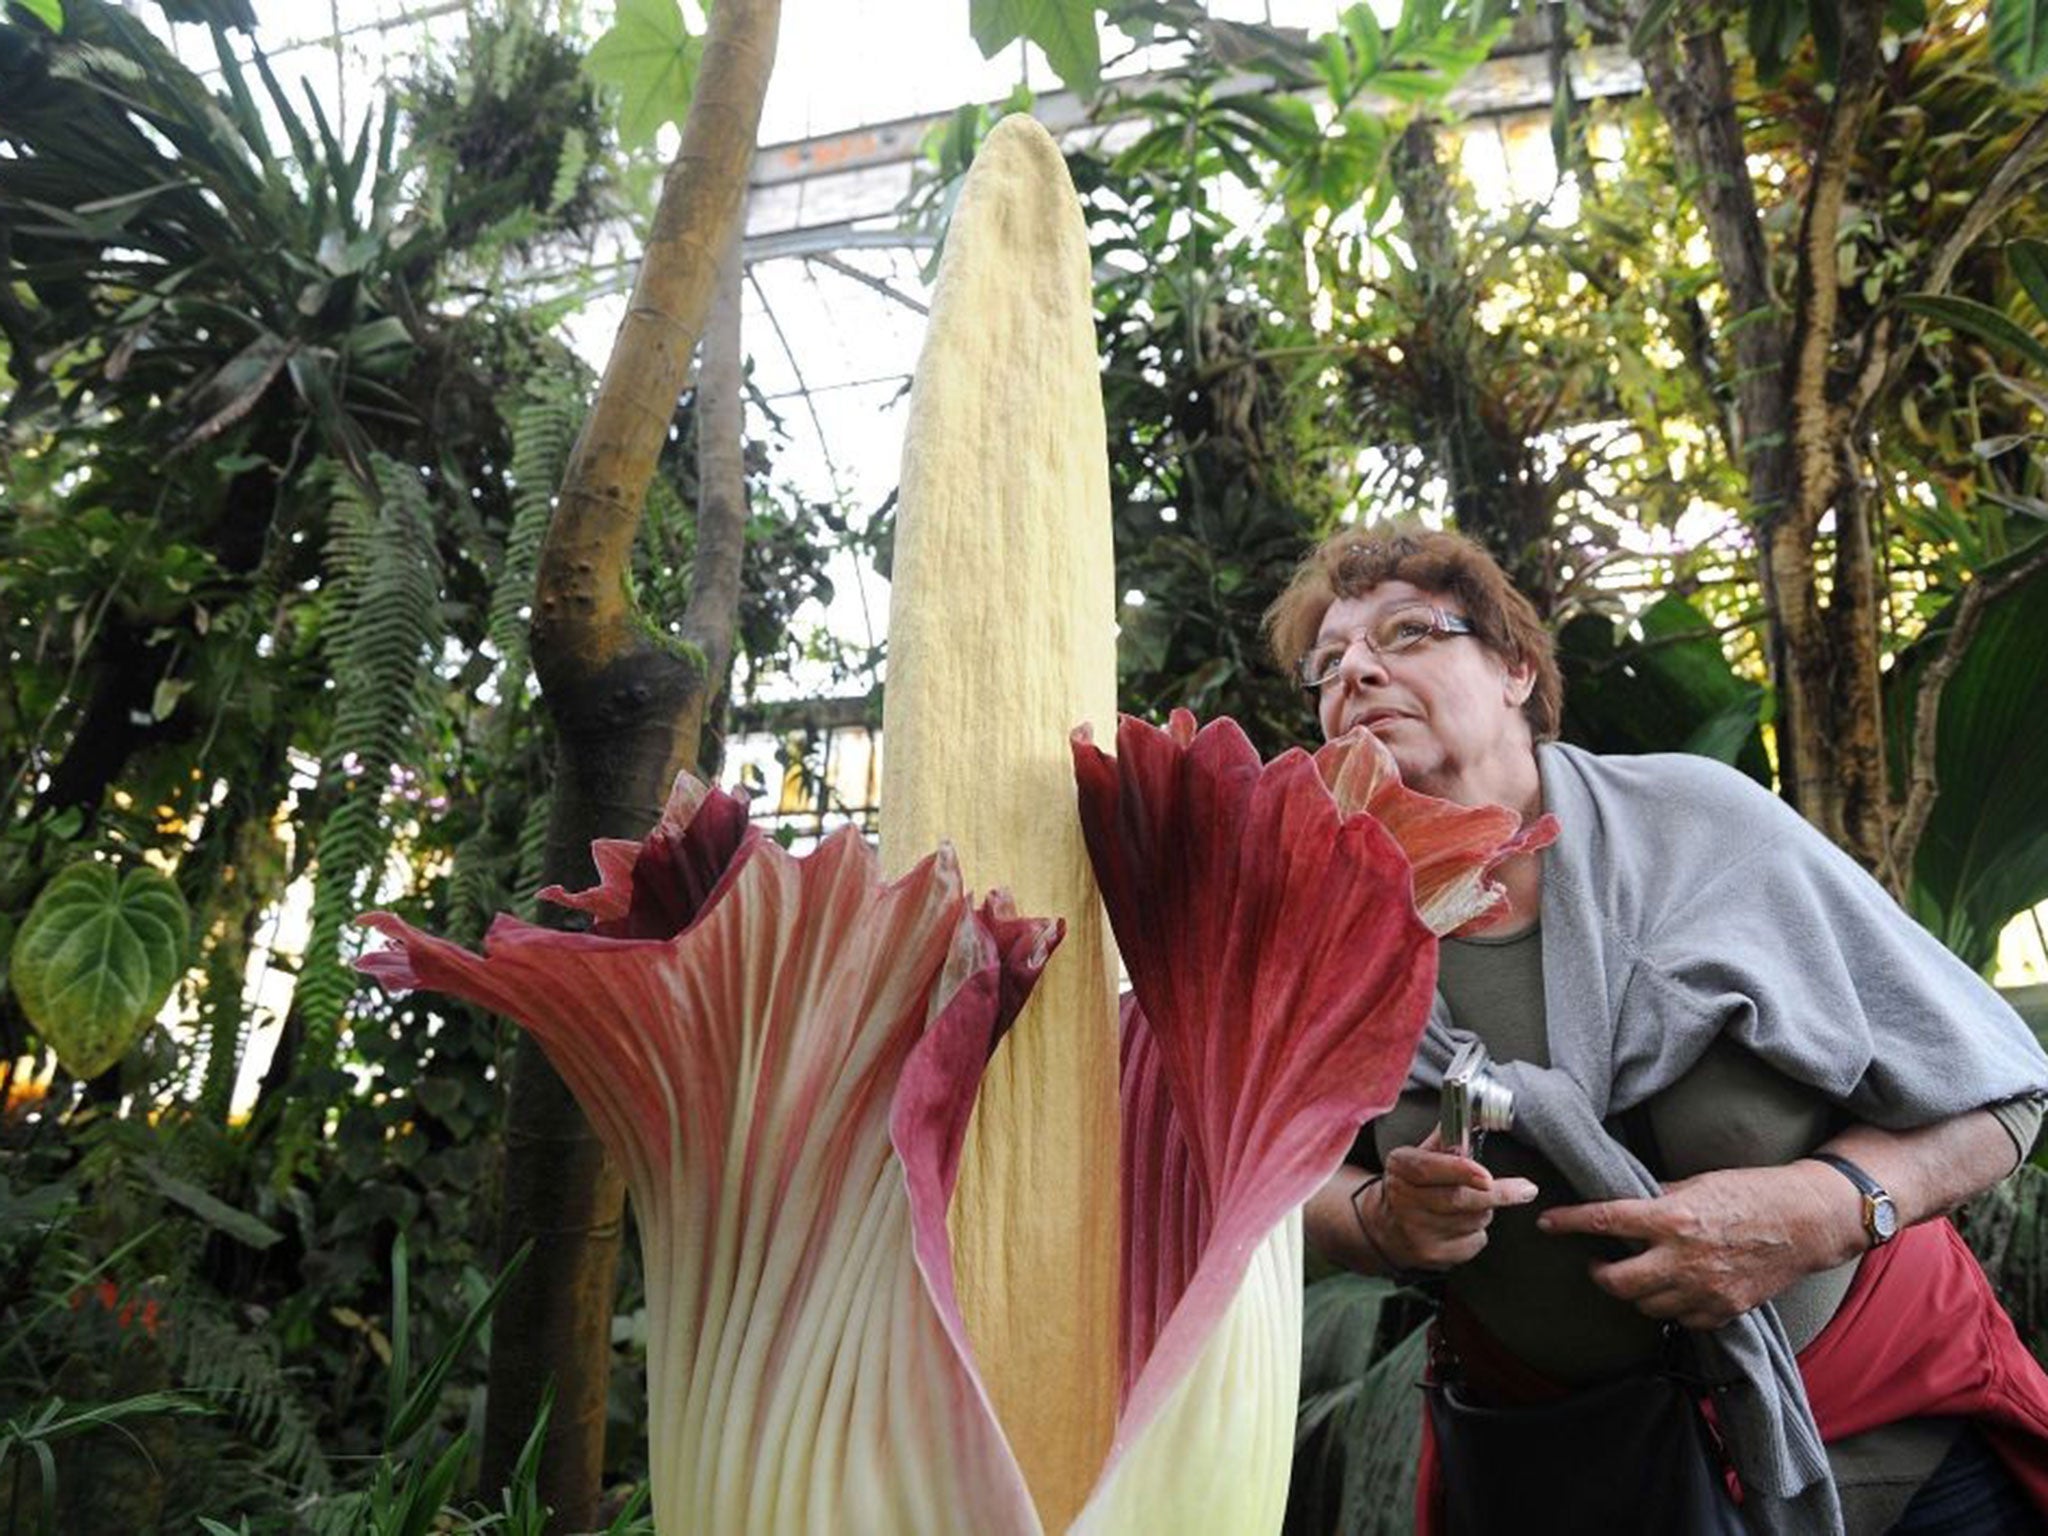 The titan arum (Amorphophallus titanum), also known as the corpse flower or stinky plant due to its odor, may remain in bloom for up to 24 to 48 hours before it begins to wilt